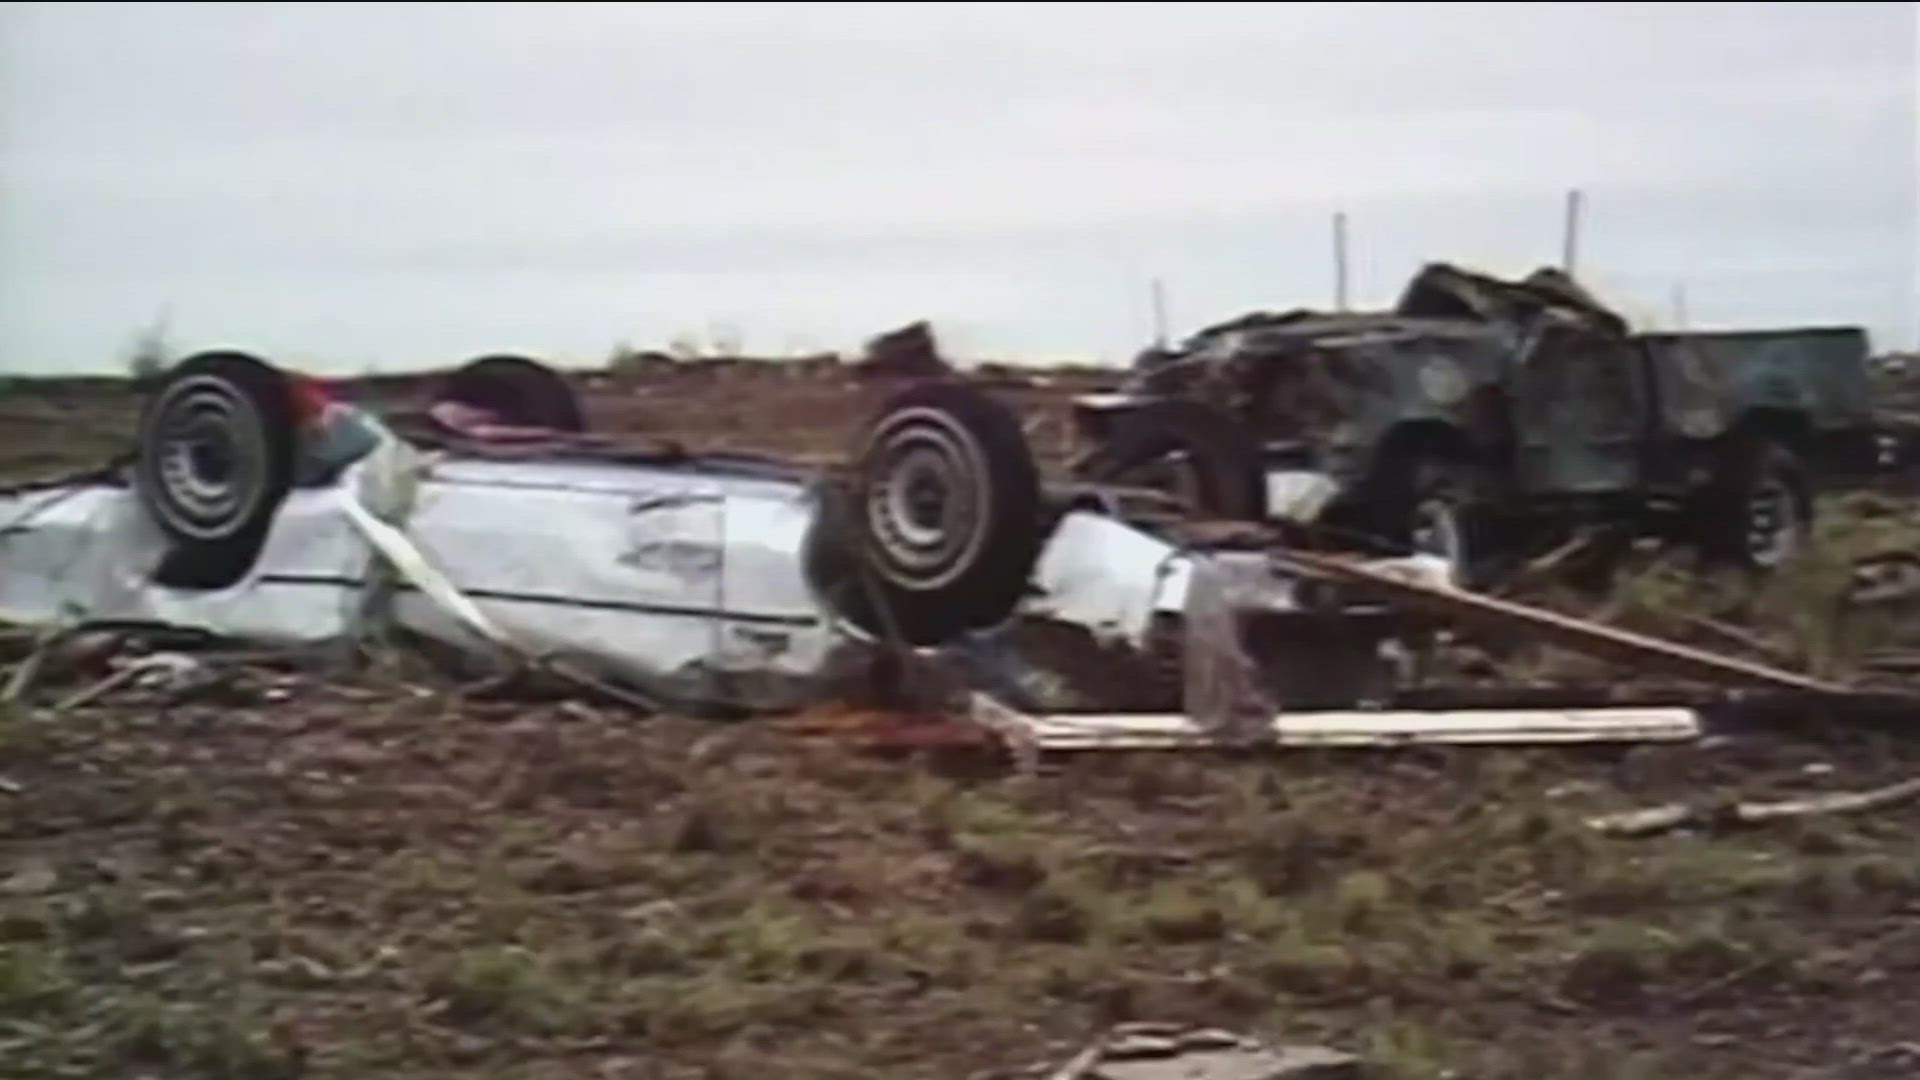 Tragedy struck 37 years ago when a storm killed one-fifth of a small Texas town.